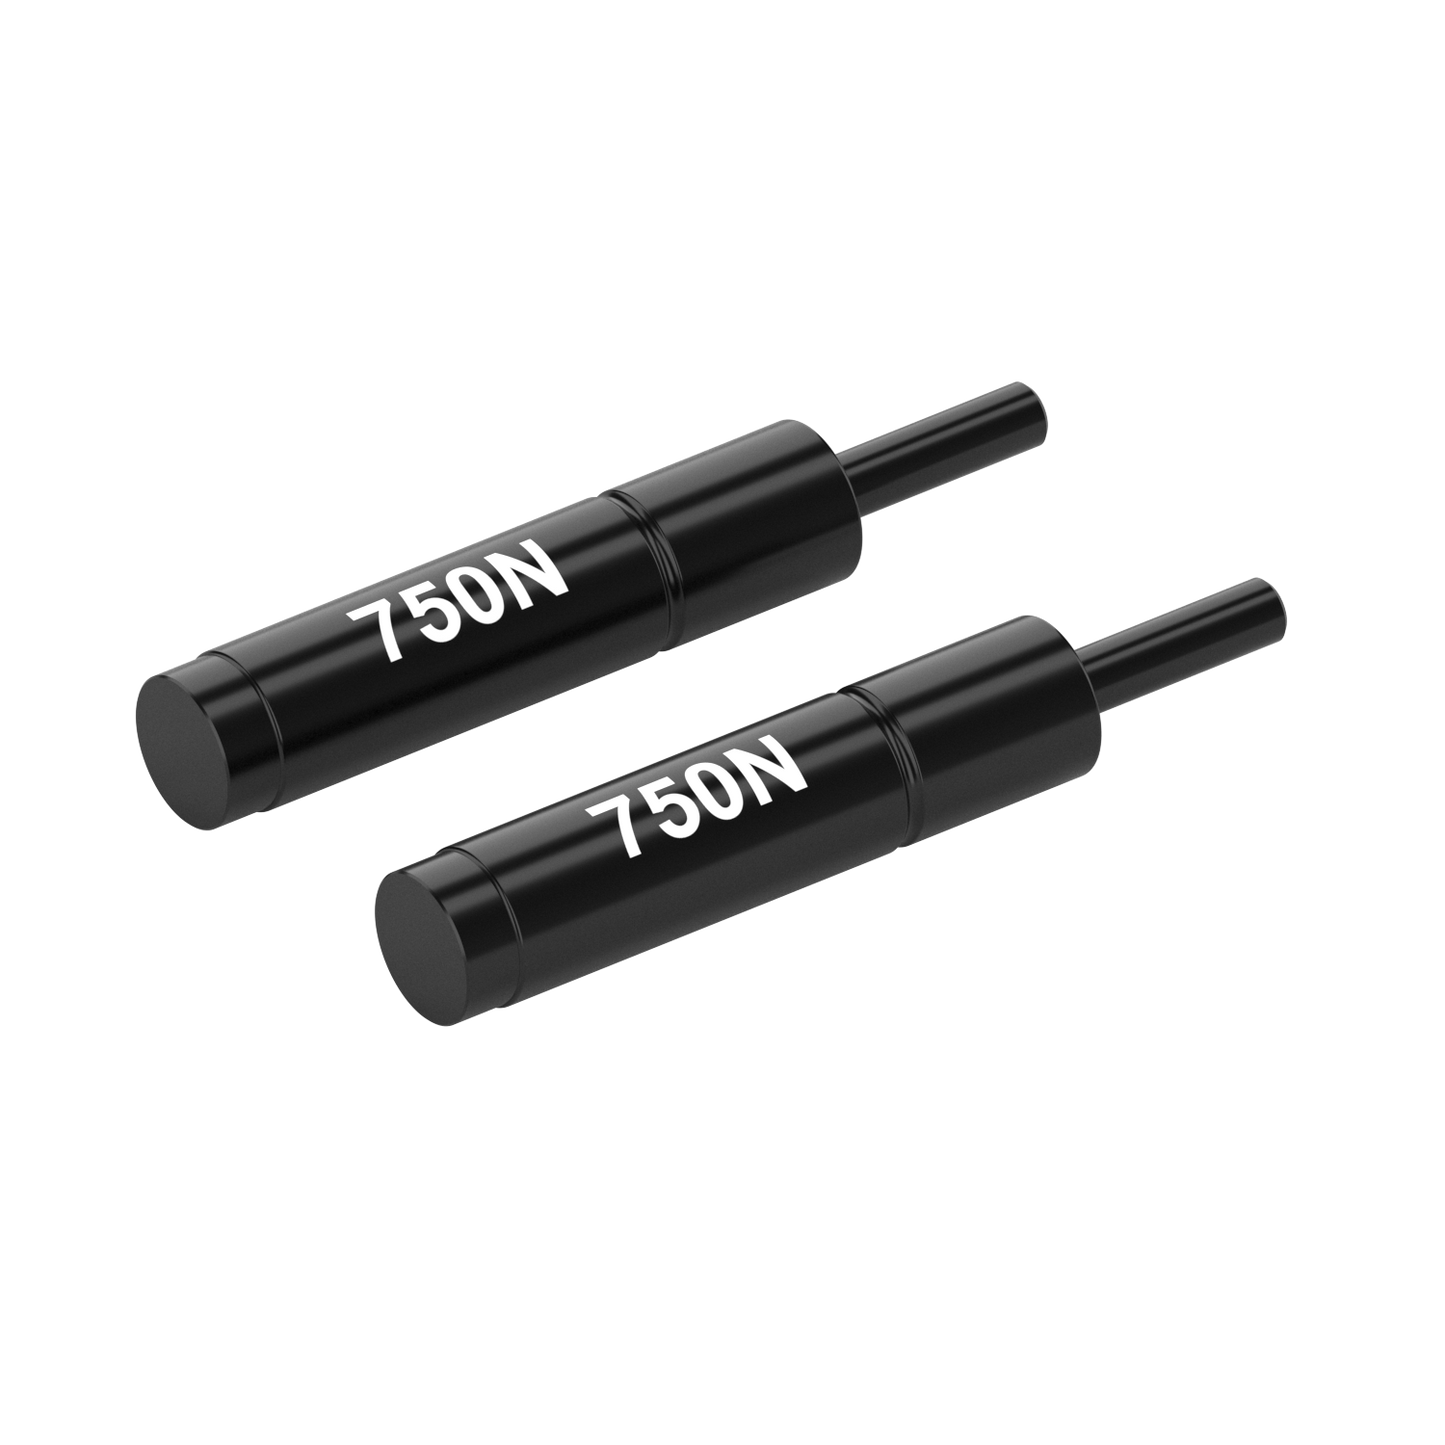 Brimotech 750N gas dampers for Stealthpivot